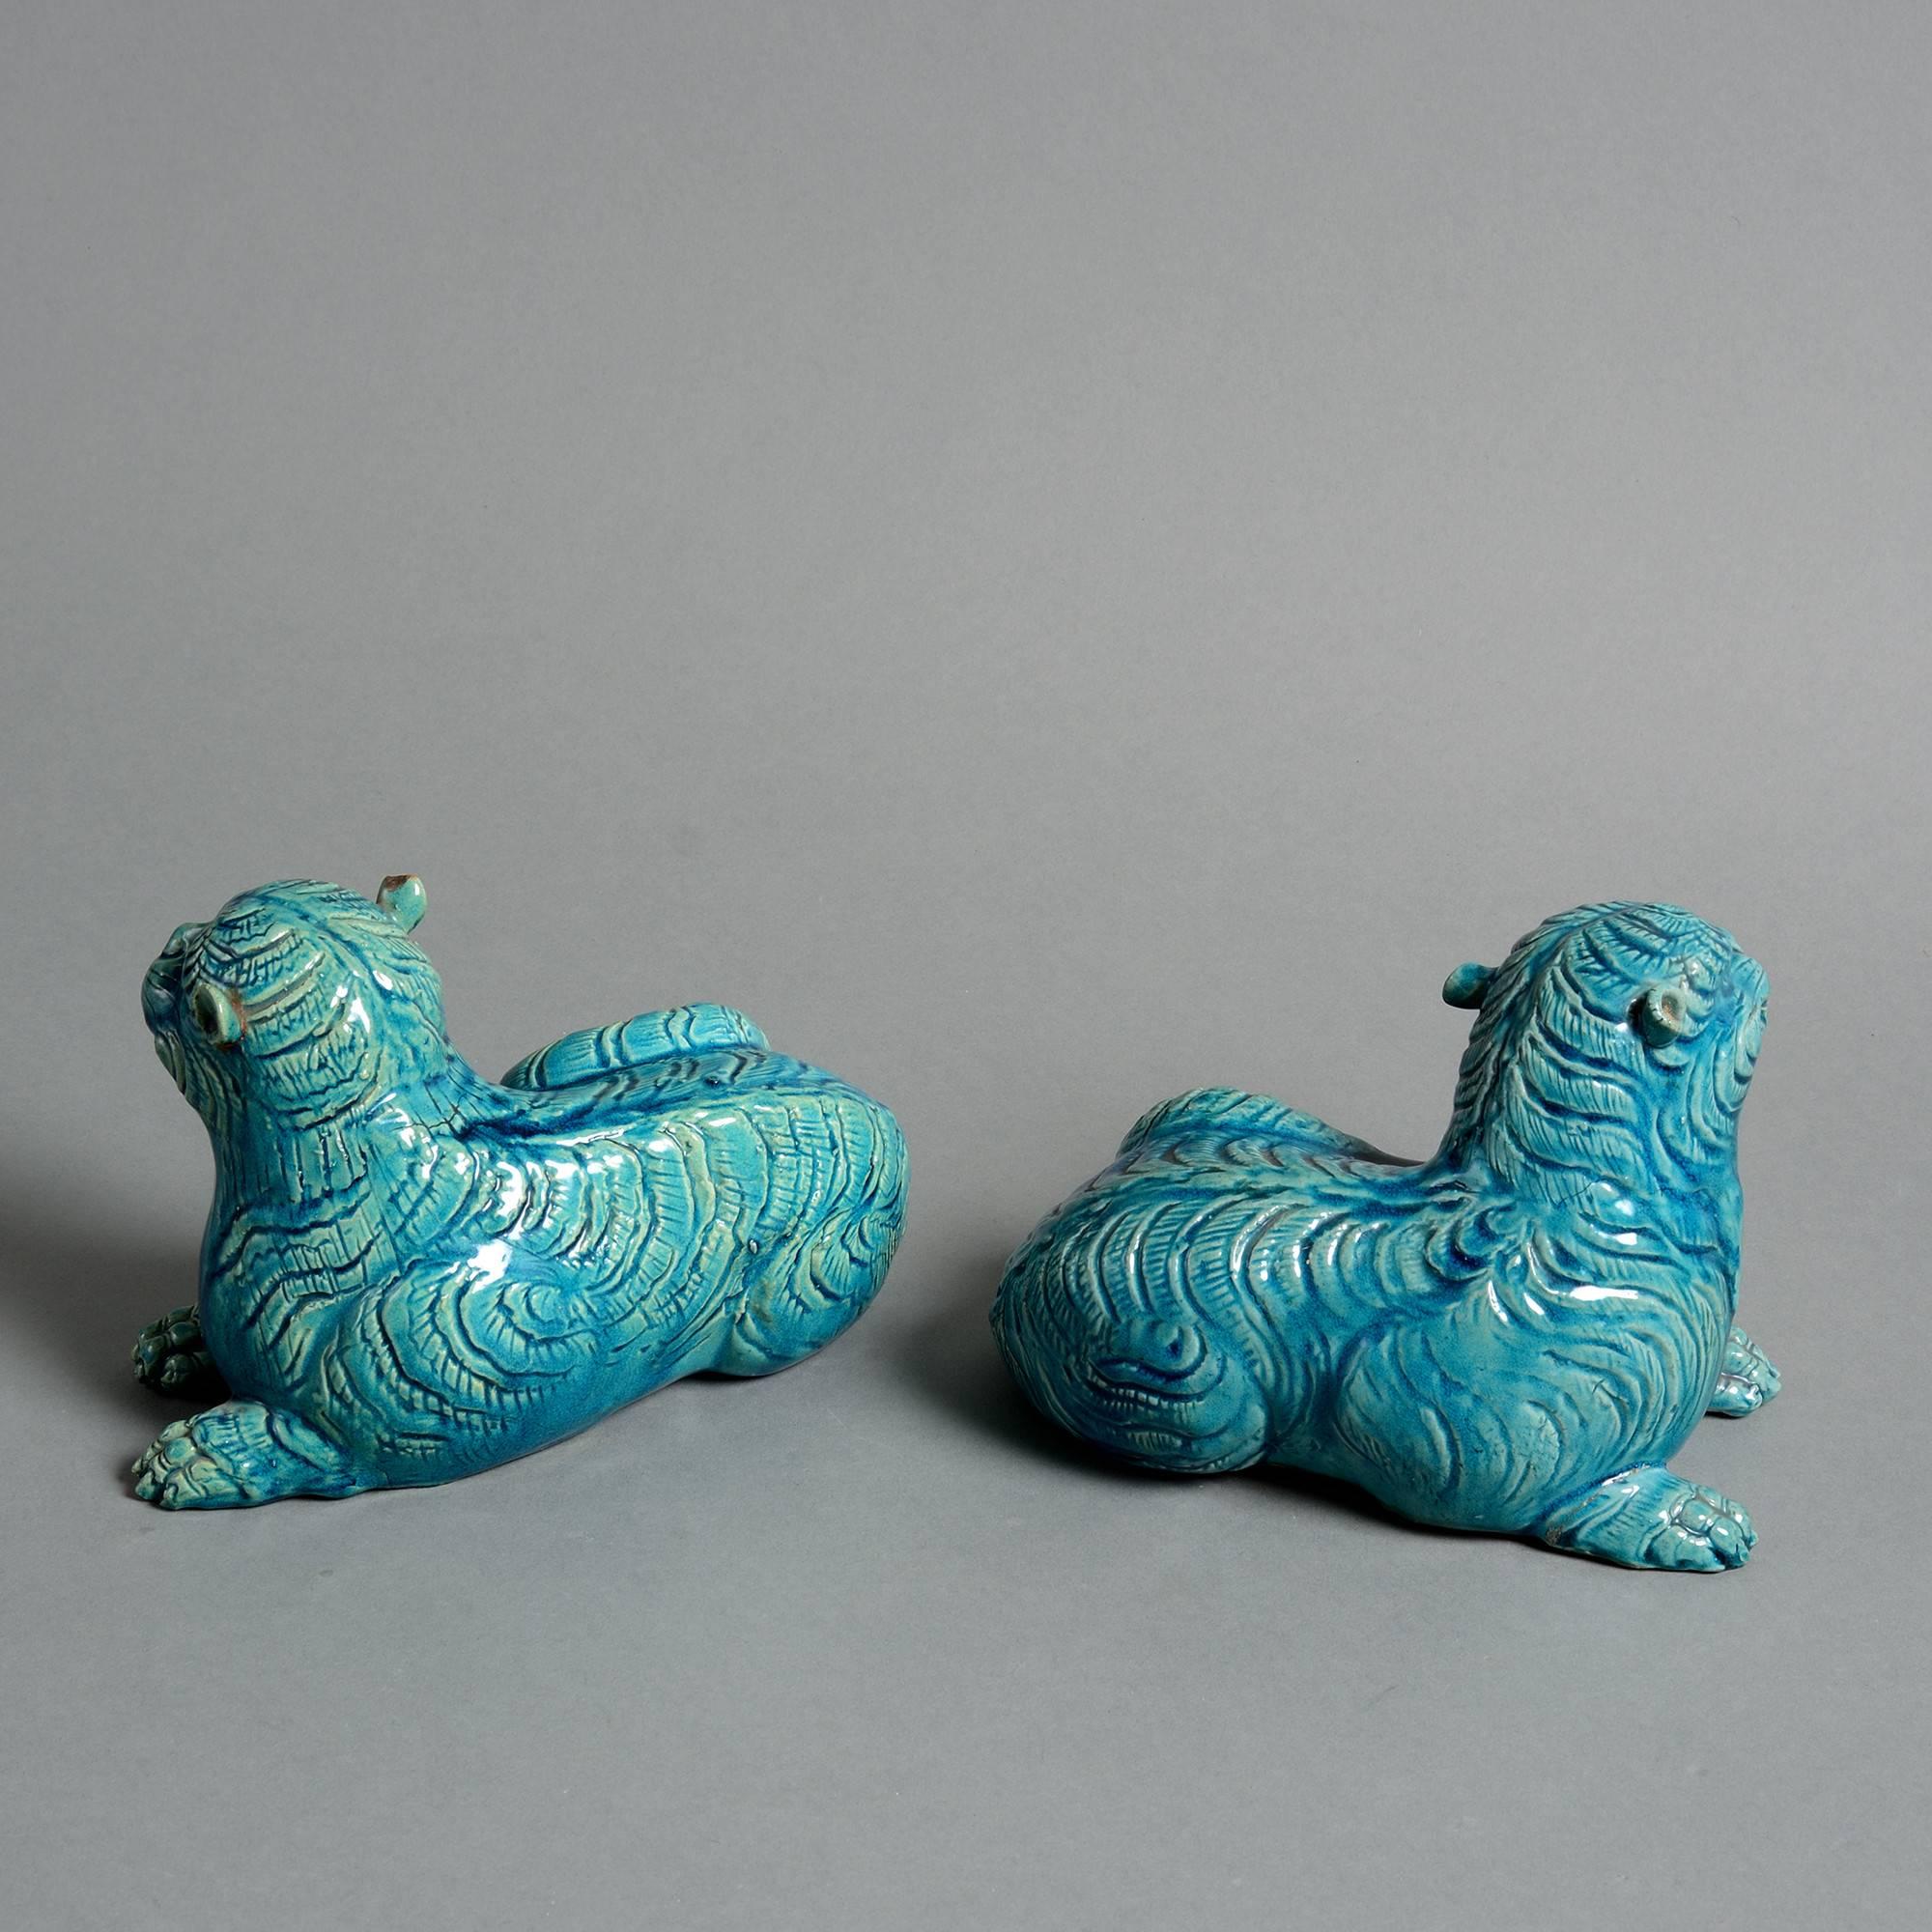 A pair of late 19th century turquoise glazed porcelain leopards, modelled seated. 

Qing dynasty.
Guangxu period (1875-1908).  

Condition: Good with a chip to one ear.